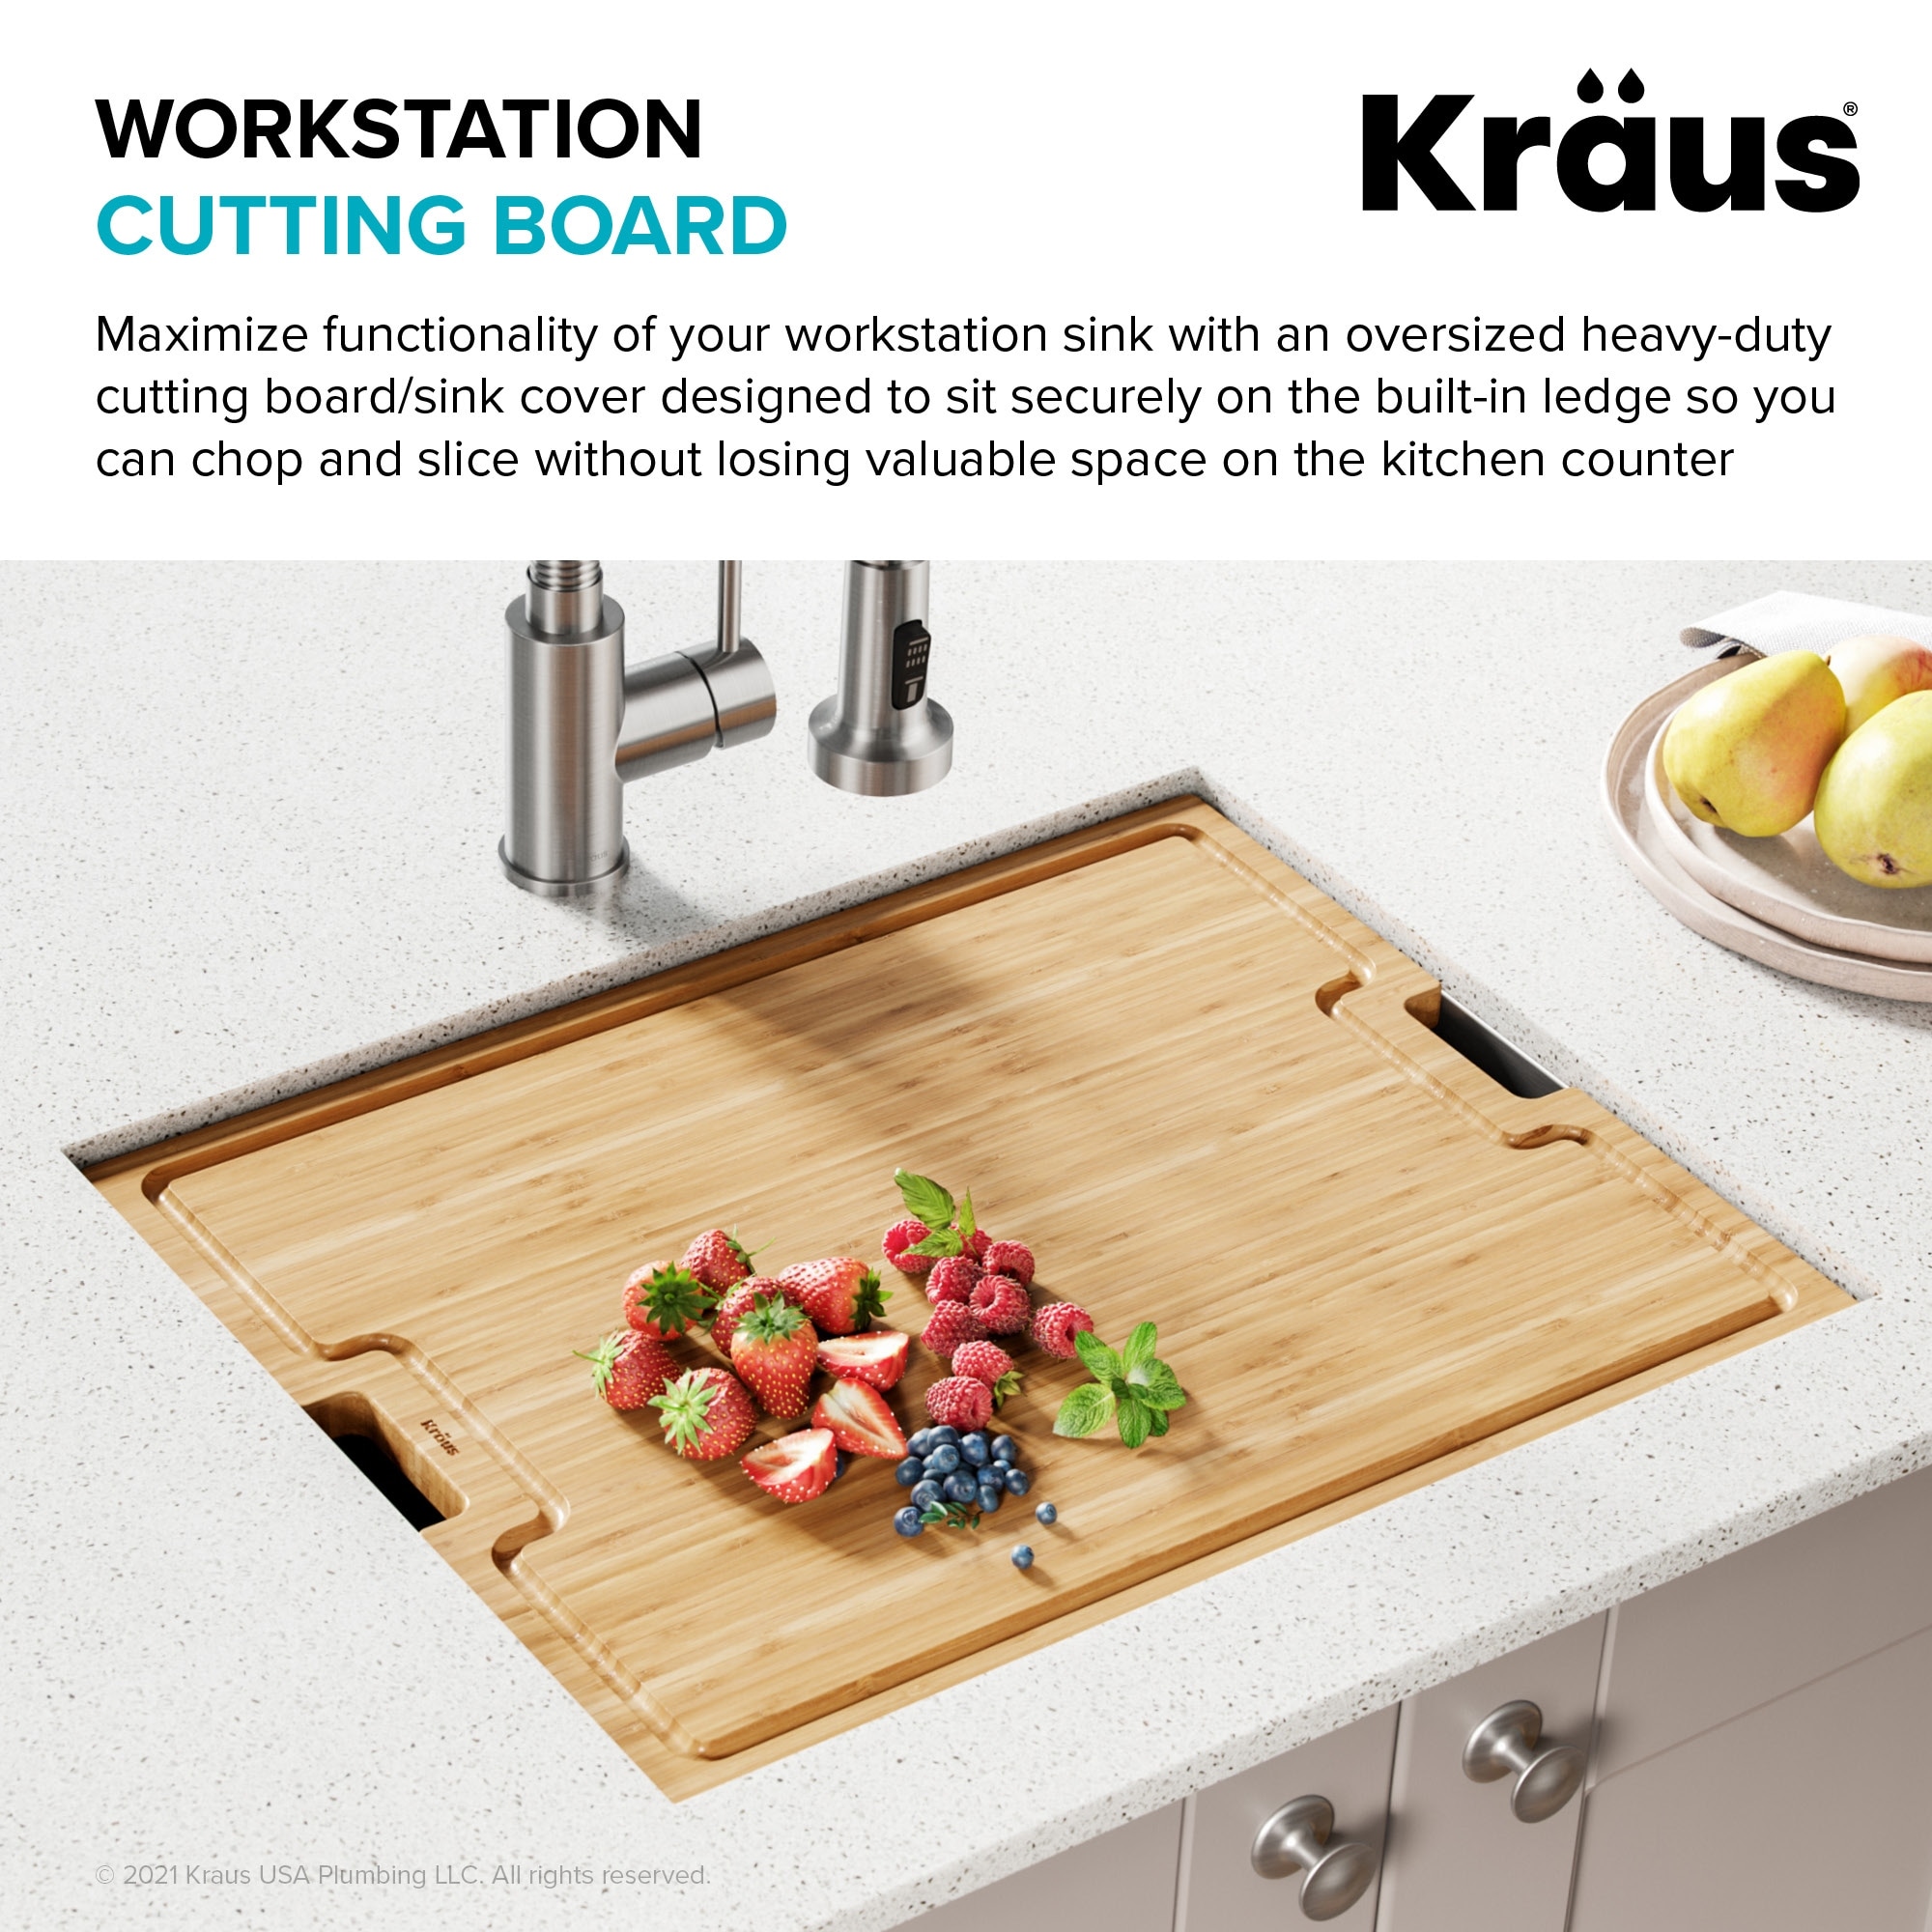 https://ak1.ostkcdn.com/images/products/is/images/direct/6777ae30f3be9b25efc07f4a1eea816544d0e60f/KRAUS-Workstation-Kitchen-Sink-Solid-Bamboo-Cutting-Board.jpg